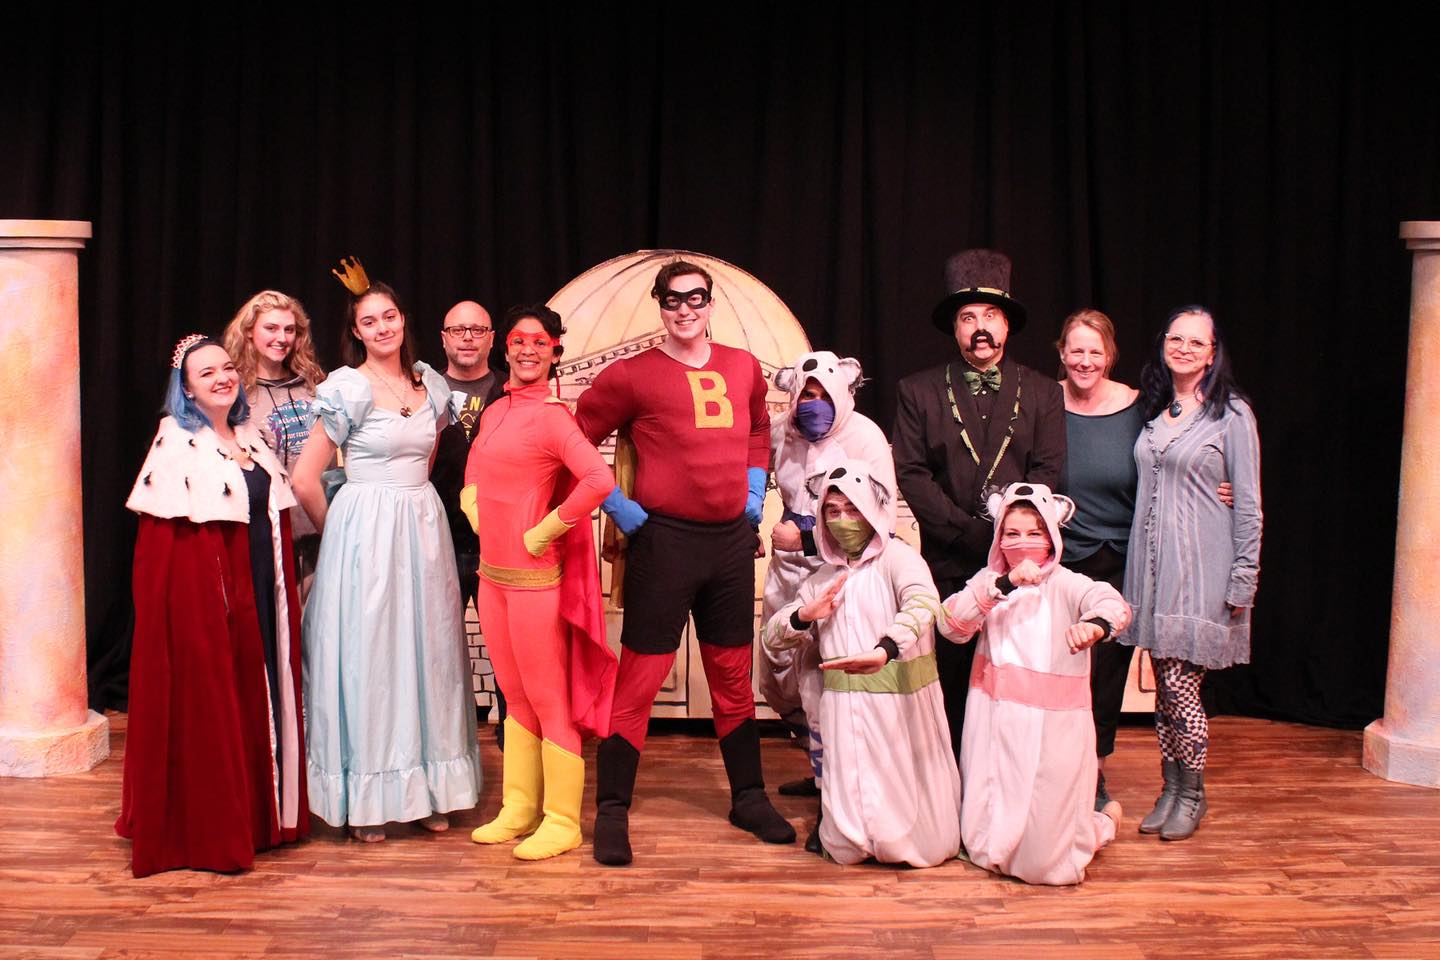 The cast and crew of Super Sidekick: The Musical at Cyrano's Theatre Company in Anchorage, AK